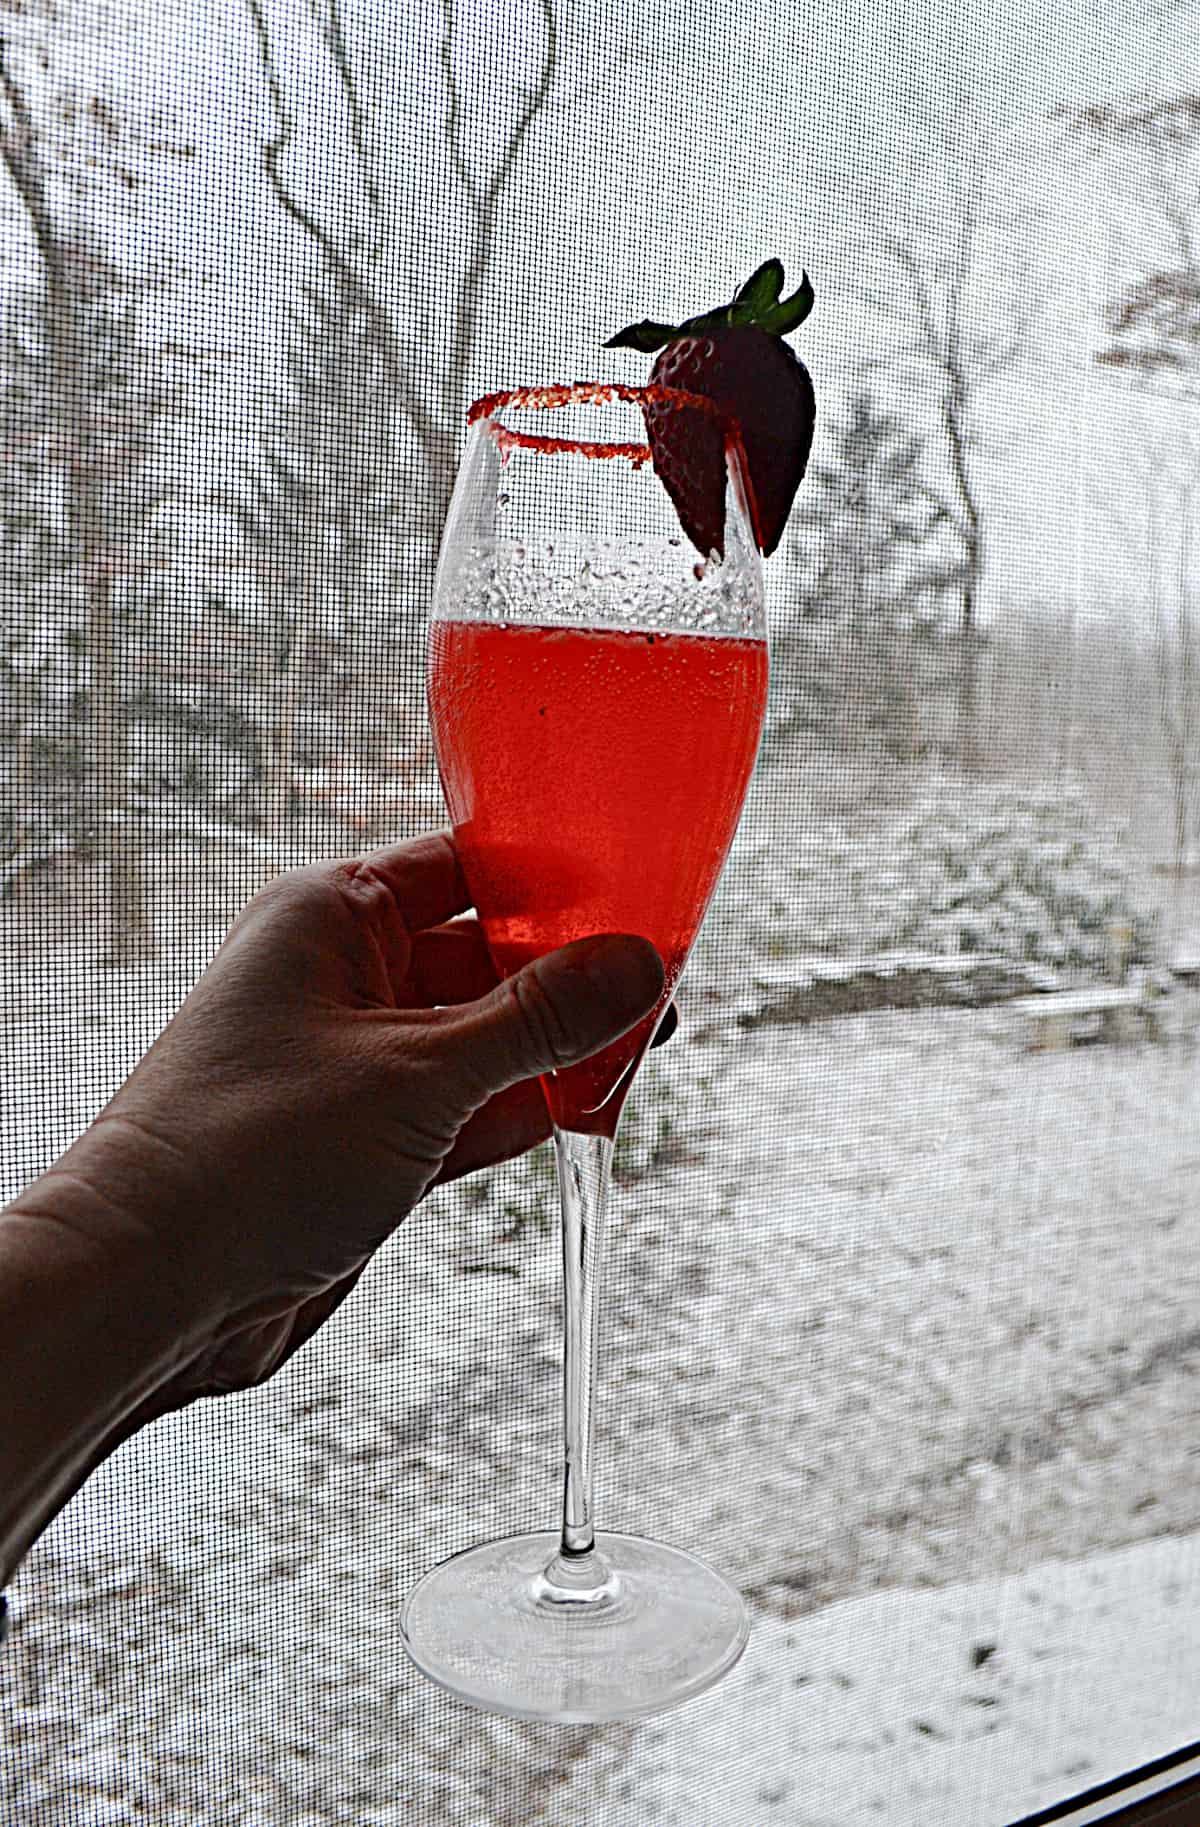 A hand holding a glass of champagne cocktail with strawberries.